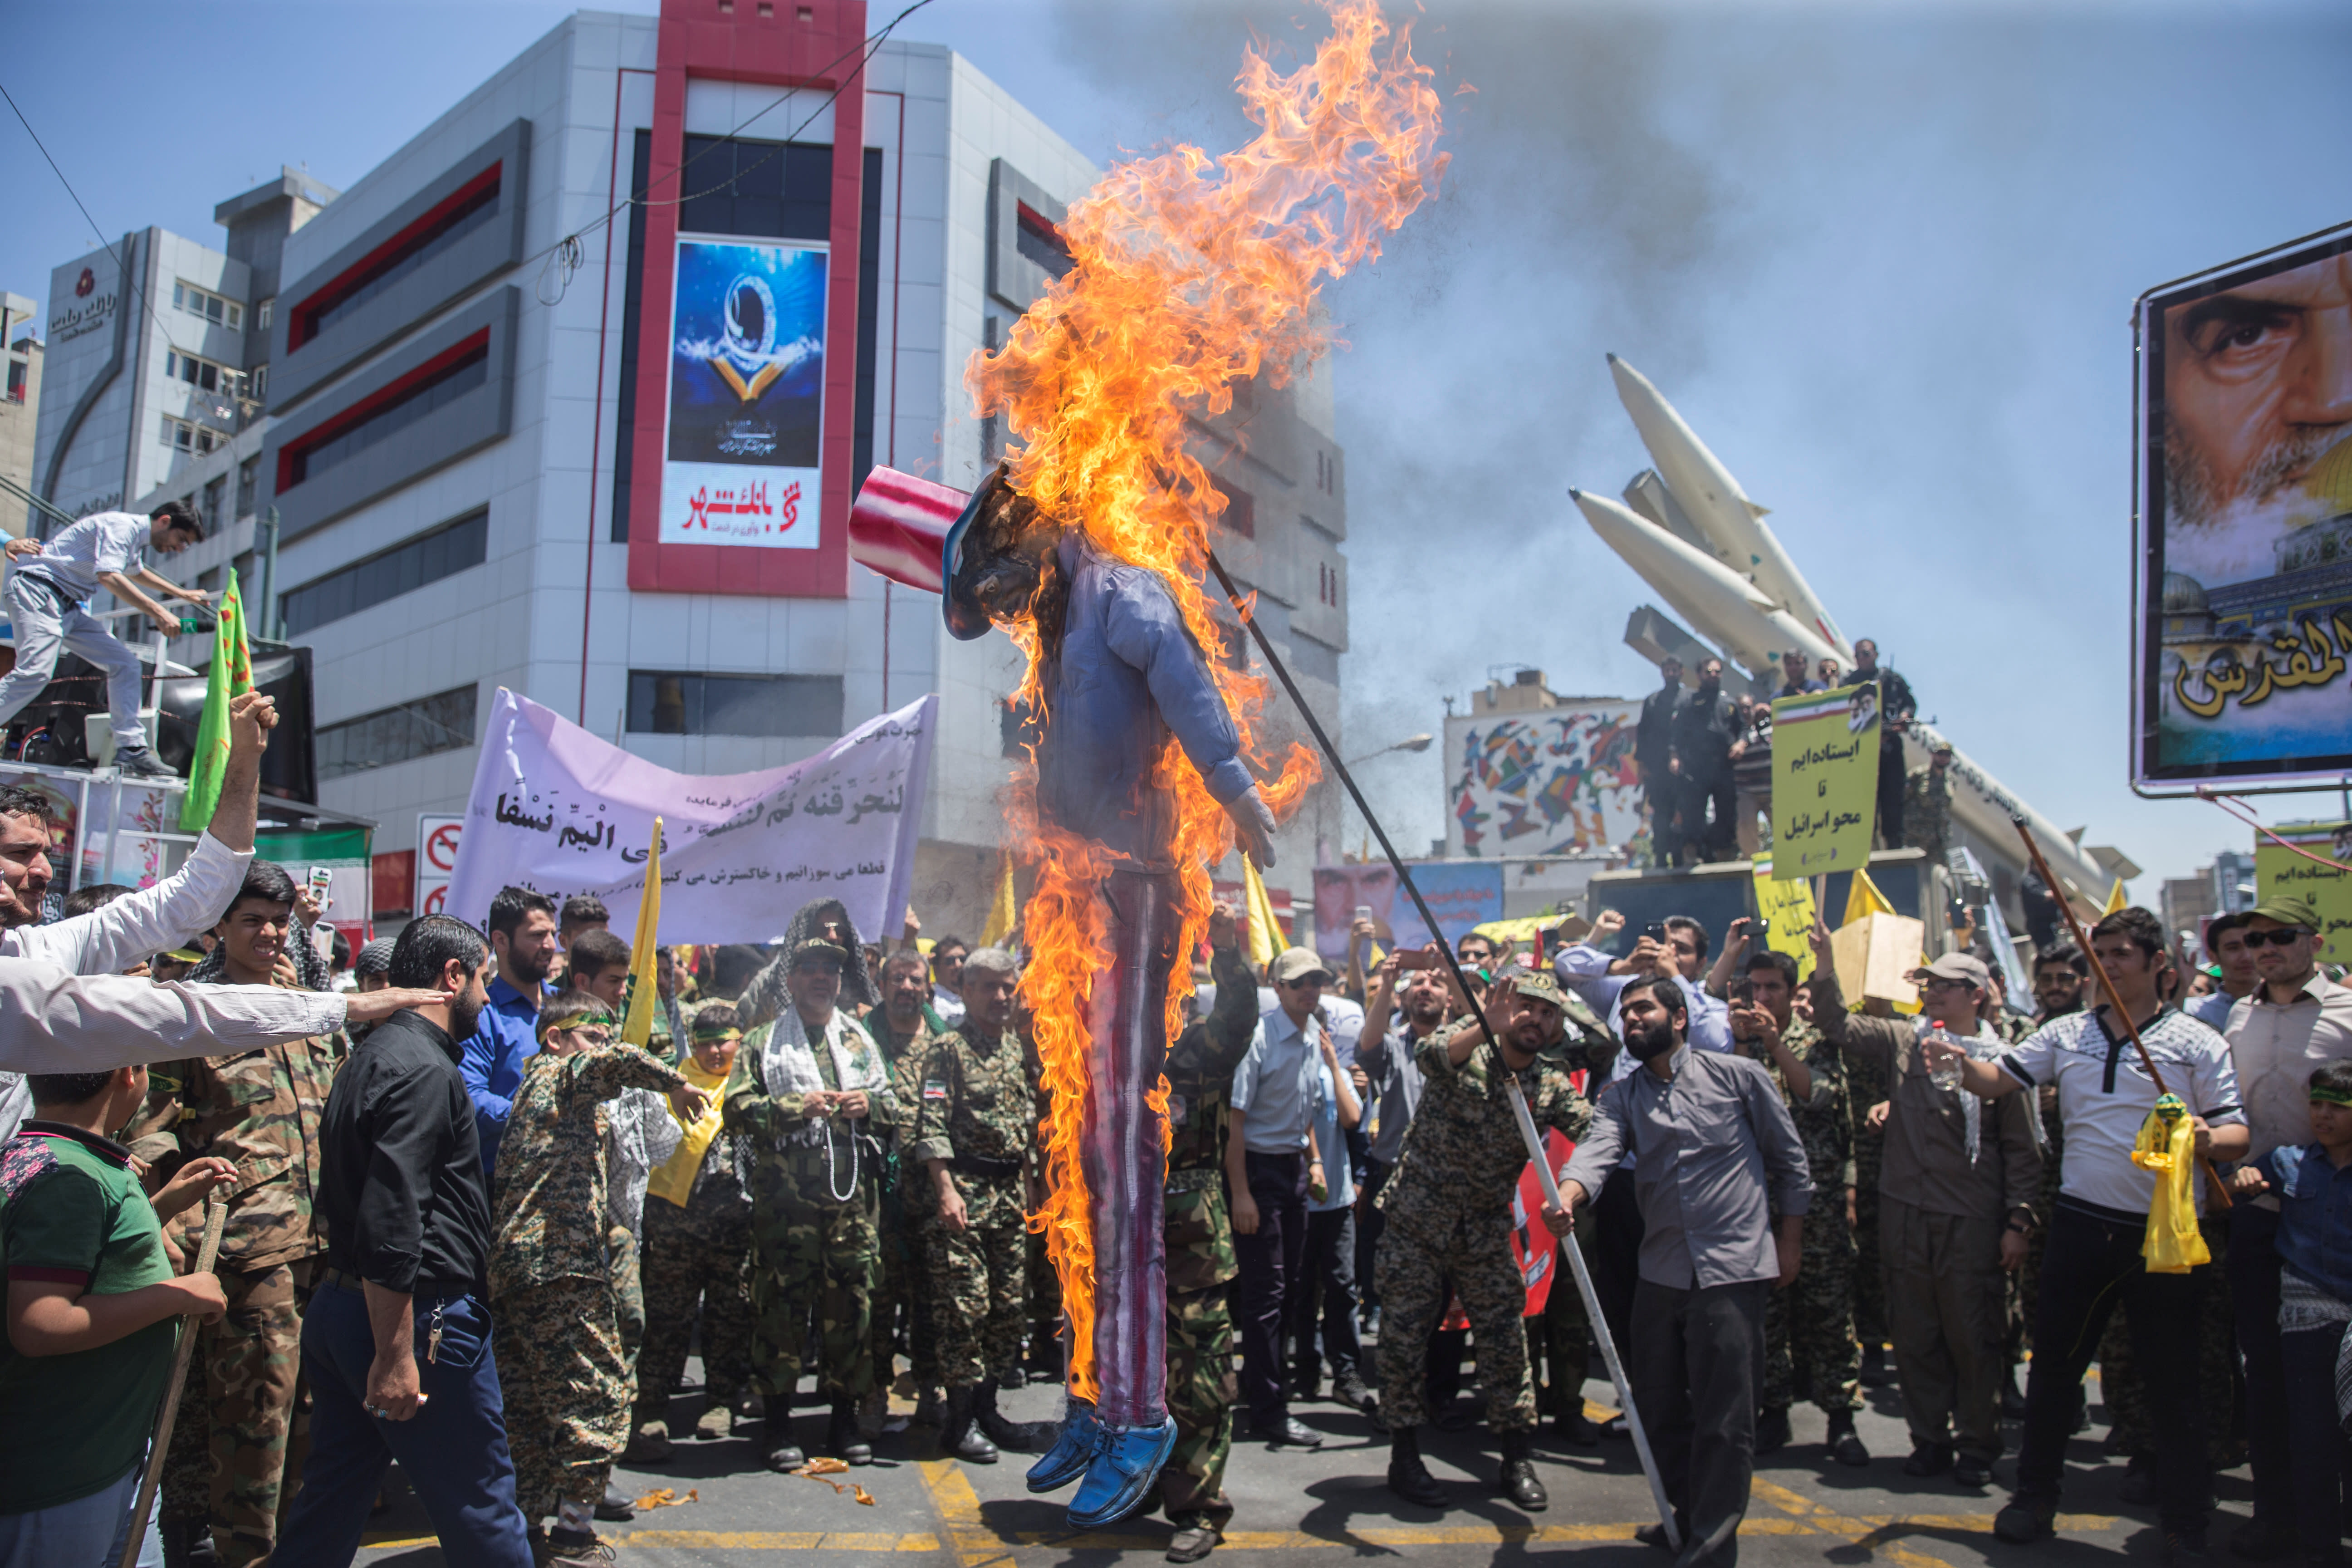 A scarecrow model is set on fire by Iranian demonstratorson during the annual pro-Palestinian rally marking Al-Quds Day in Tehran, Iran, June 23, 2017. (NAZANIN TABATABAEE YAZDI/ TIMA VIA REUTERS)